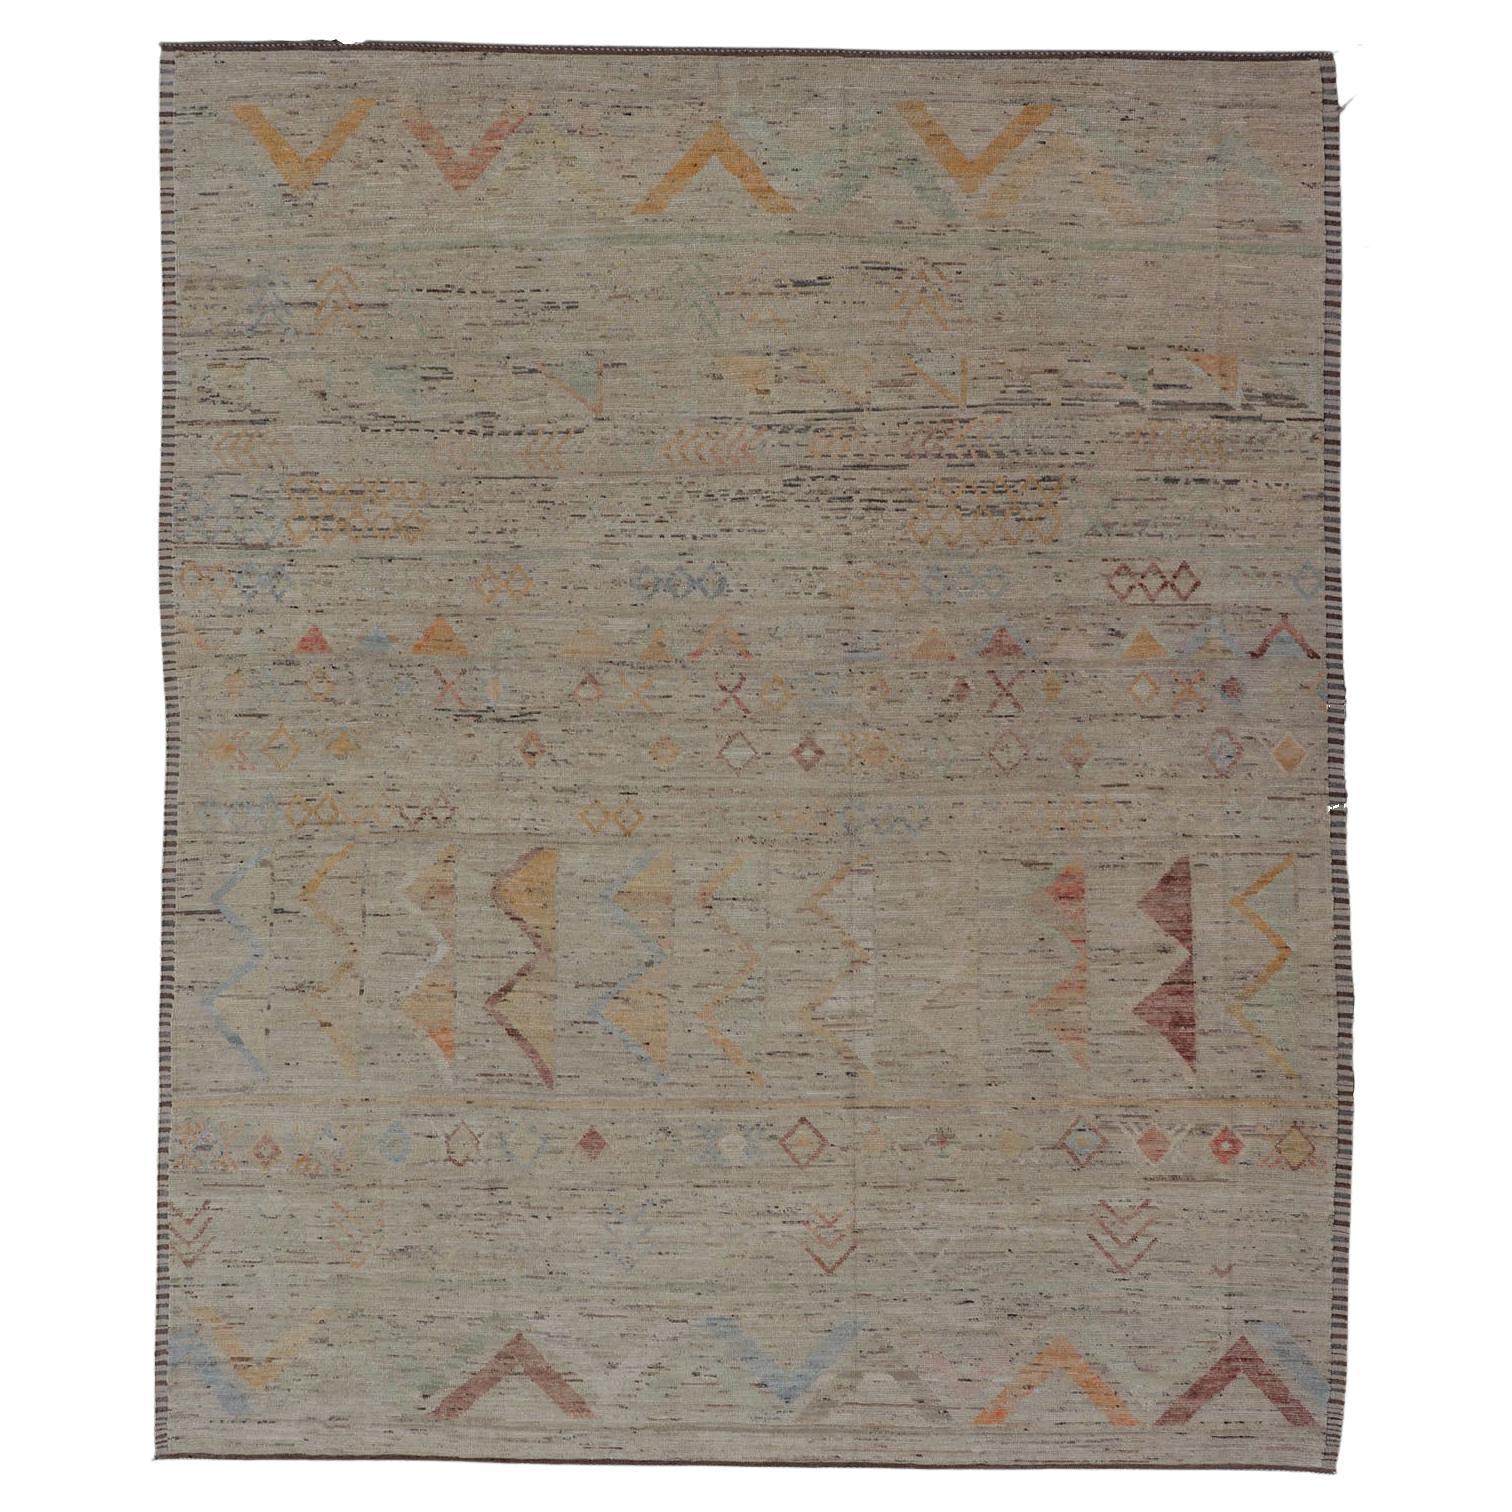 Large Modern Casual Area Rug in Sandy Tones With Pops of Color For Sale